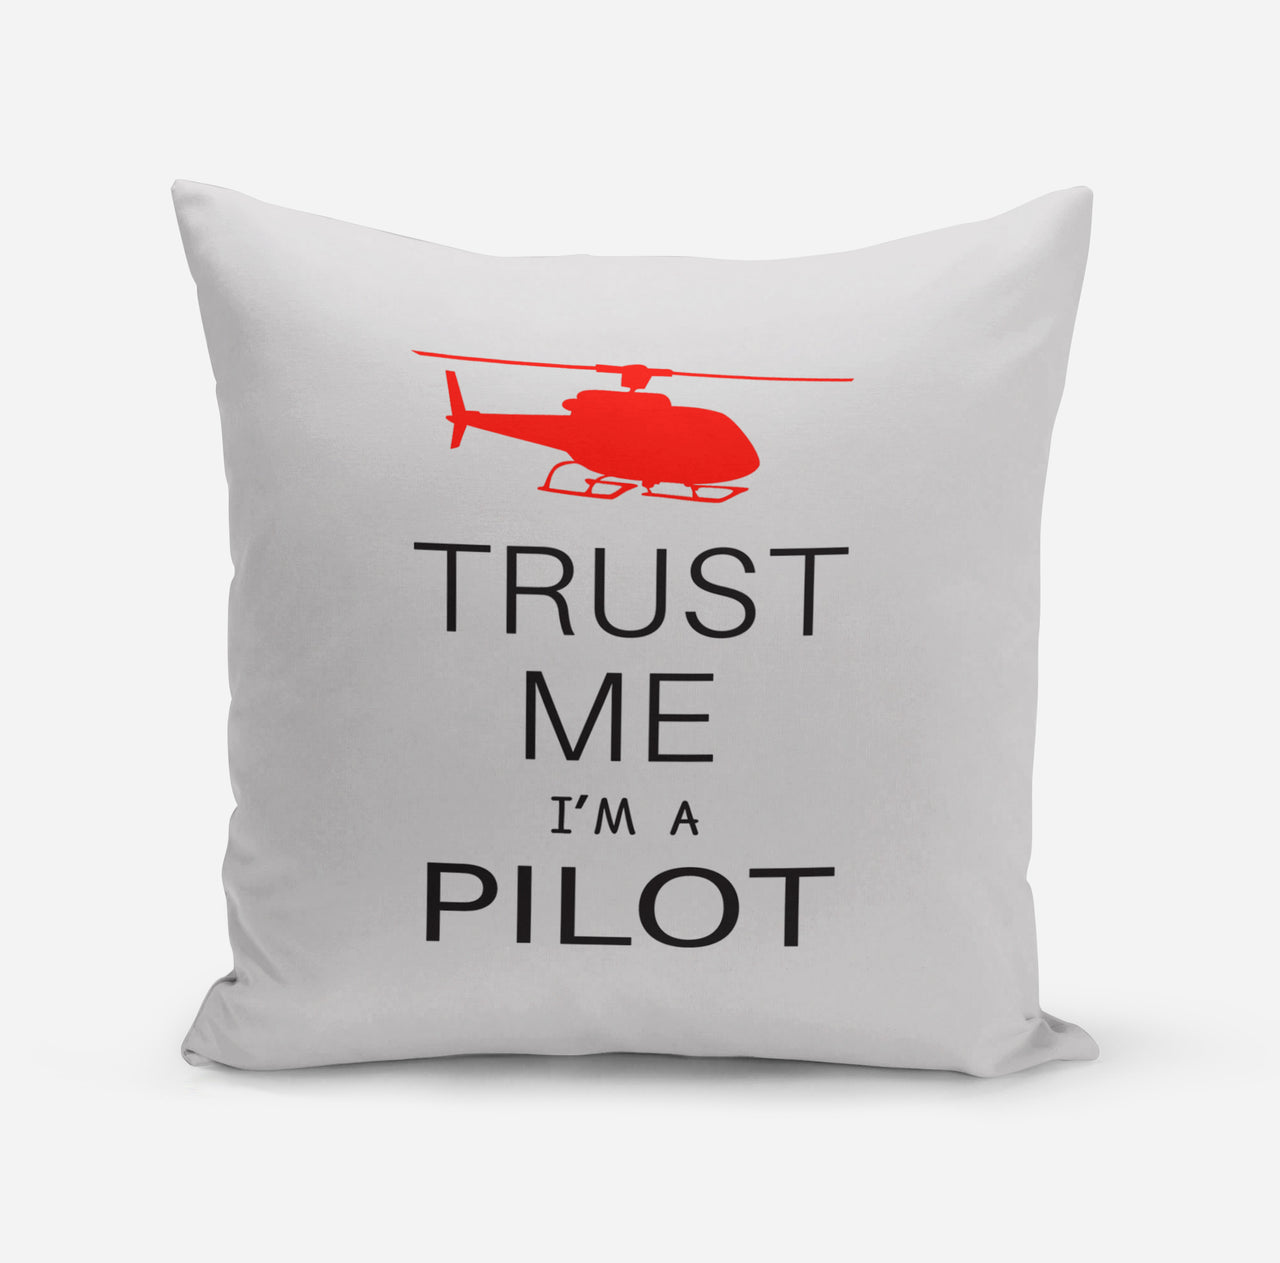 Trust Me I'm a Pilot (Helicopter) Designed Pillows